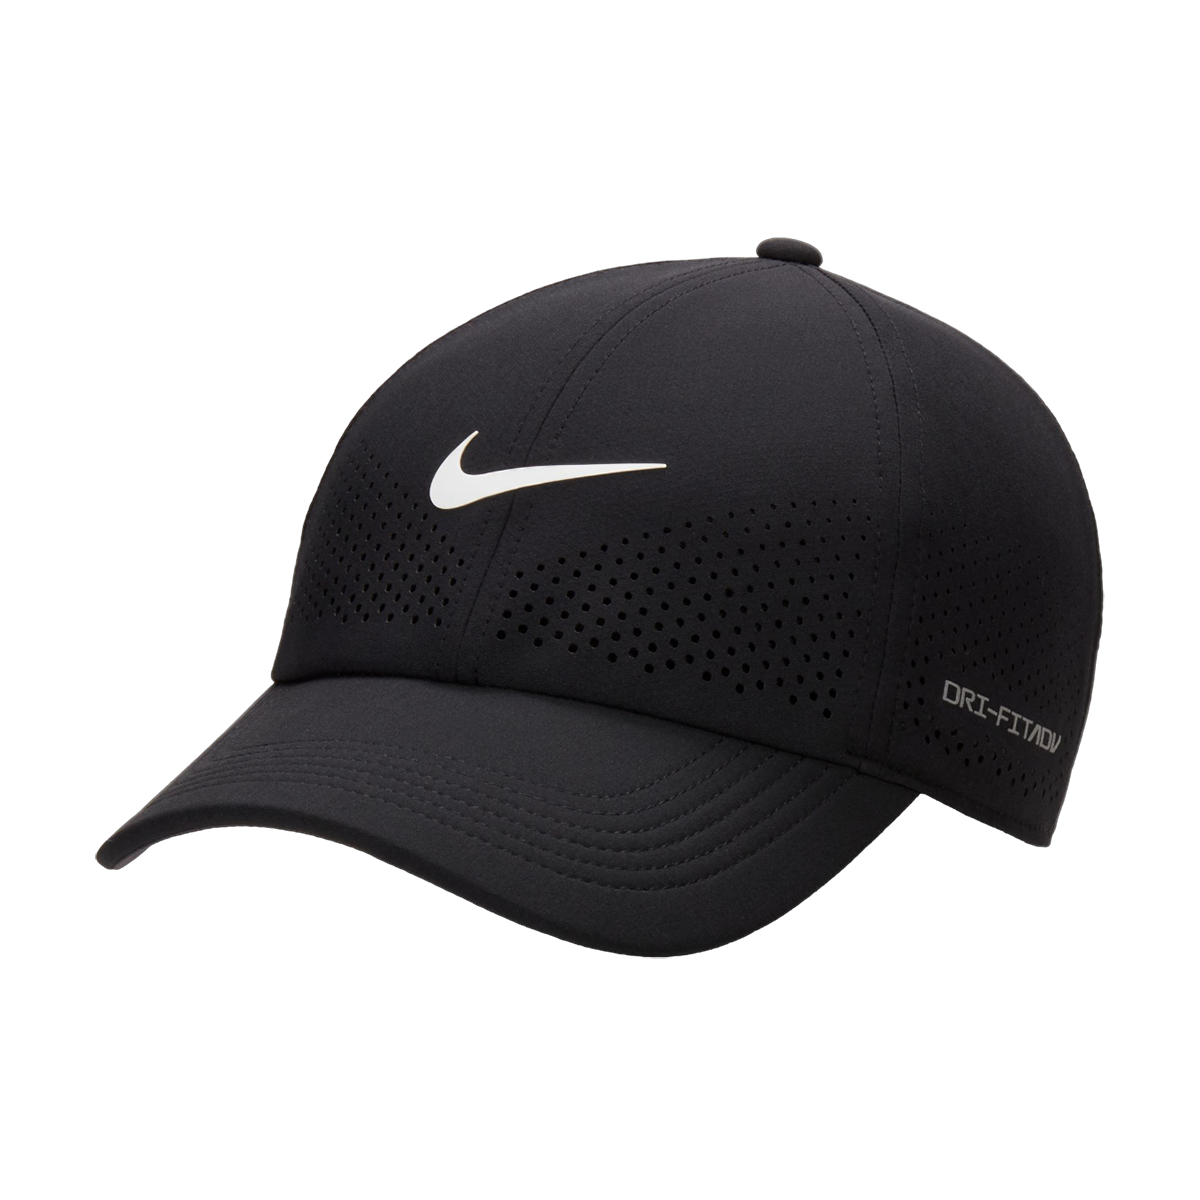 Nike Dri-FIT ADV Club Hat, , large image number null